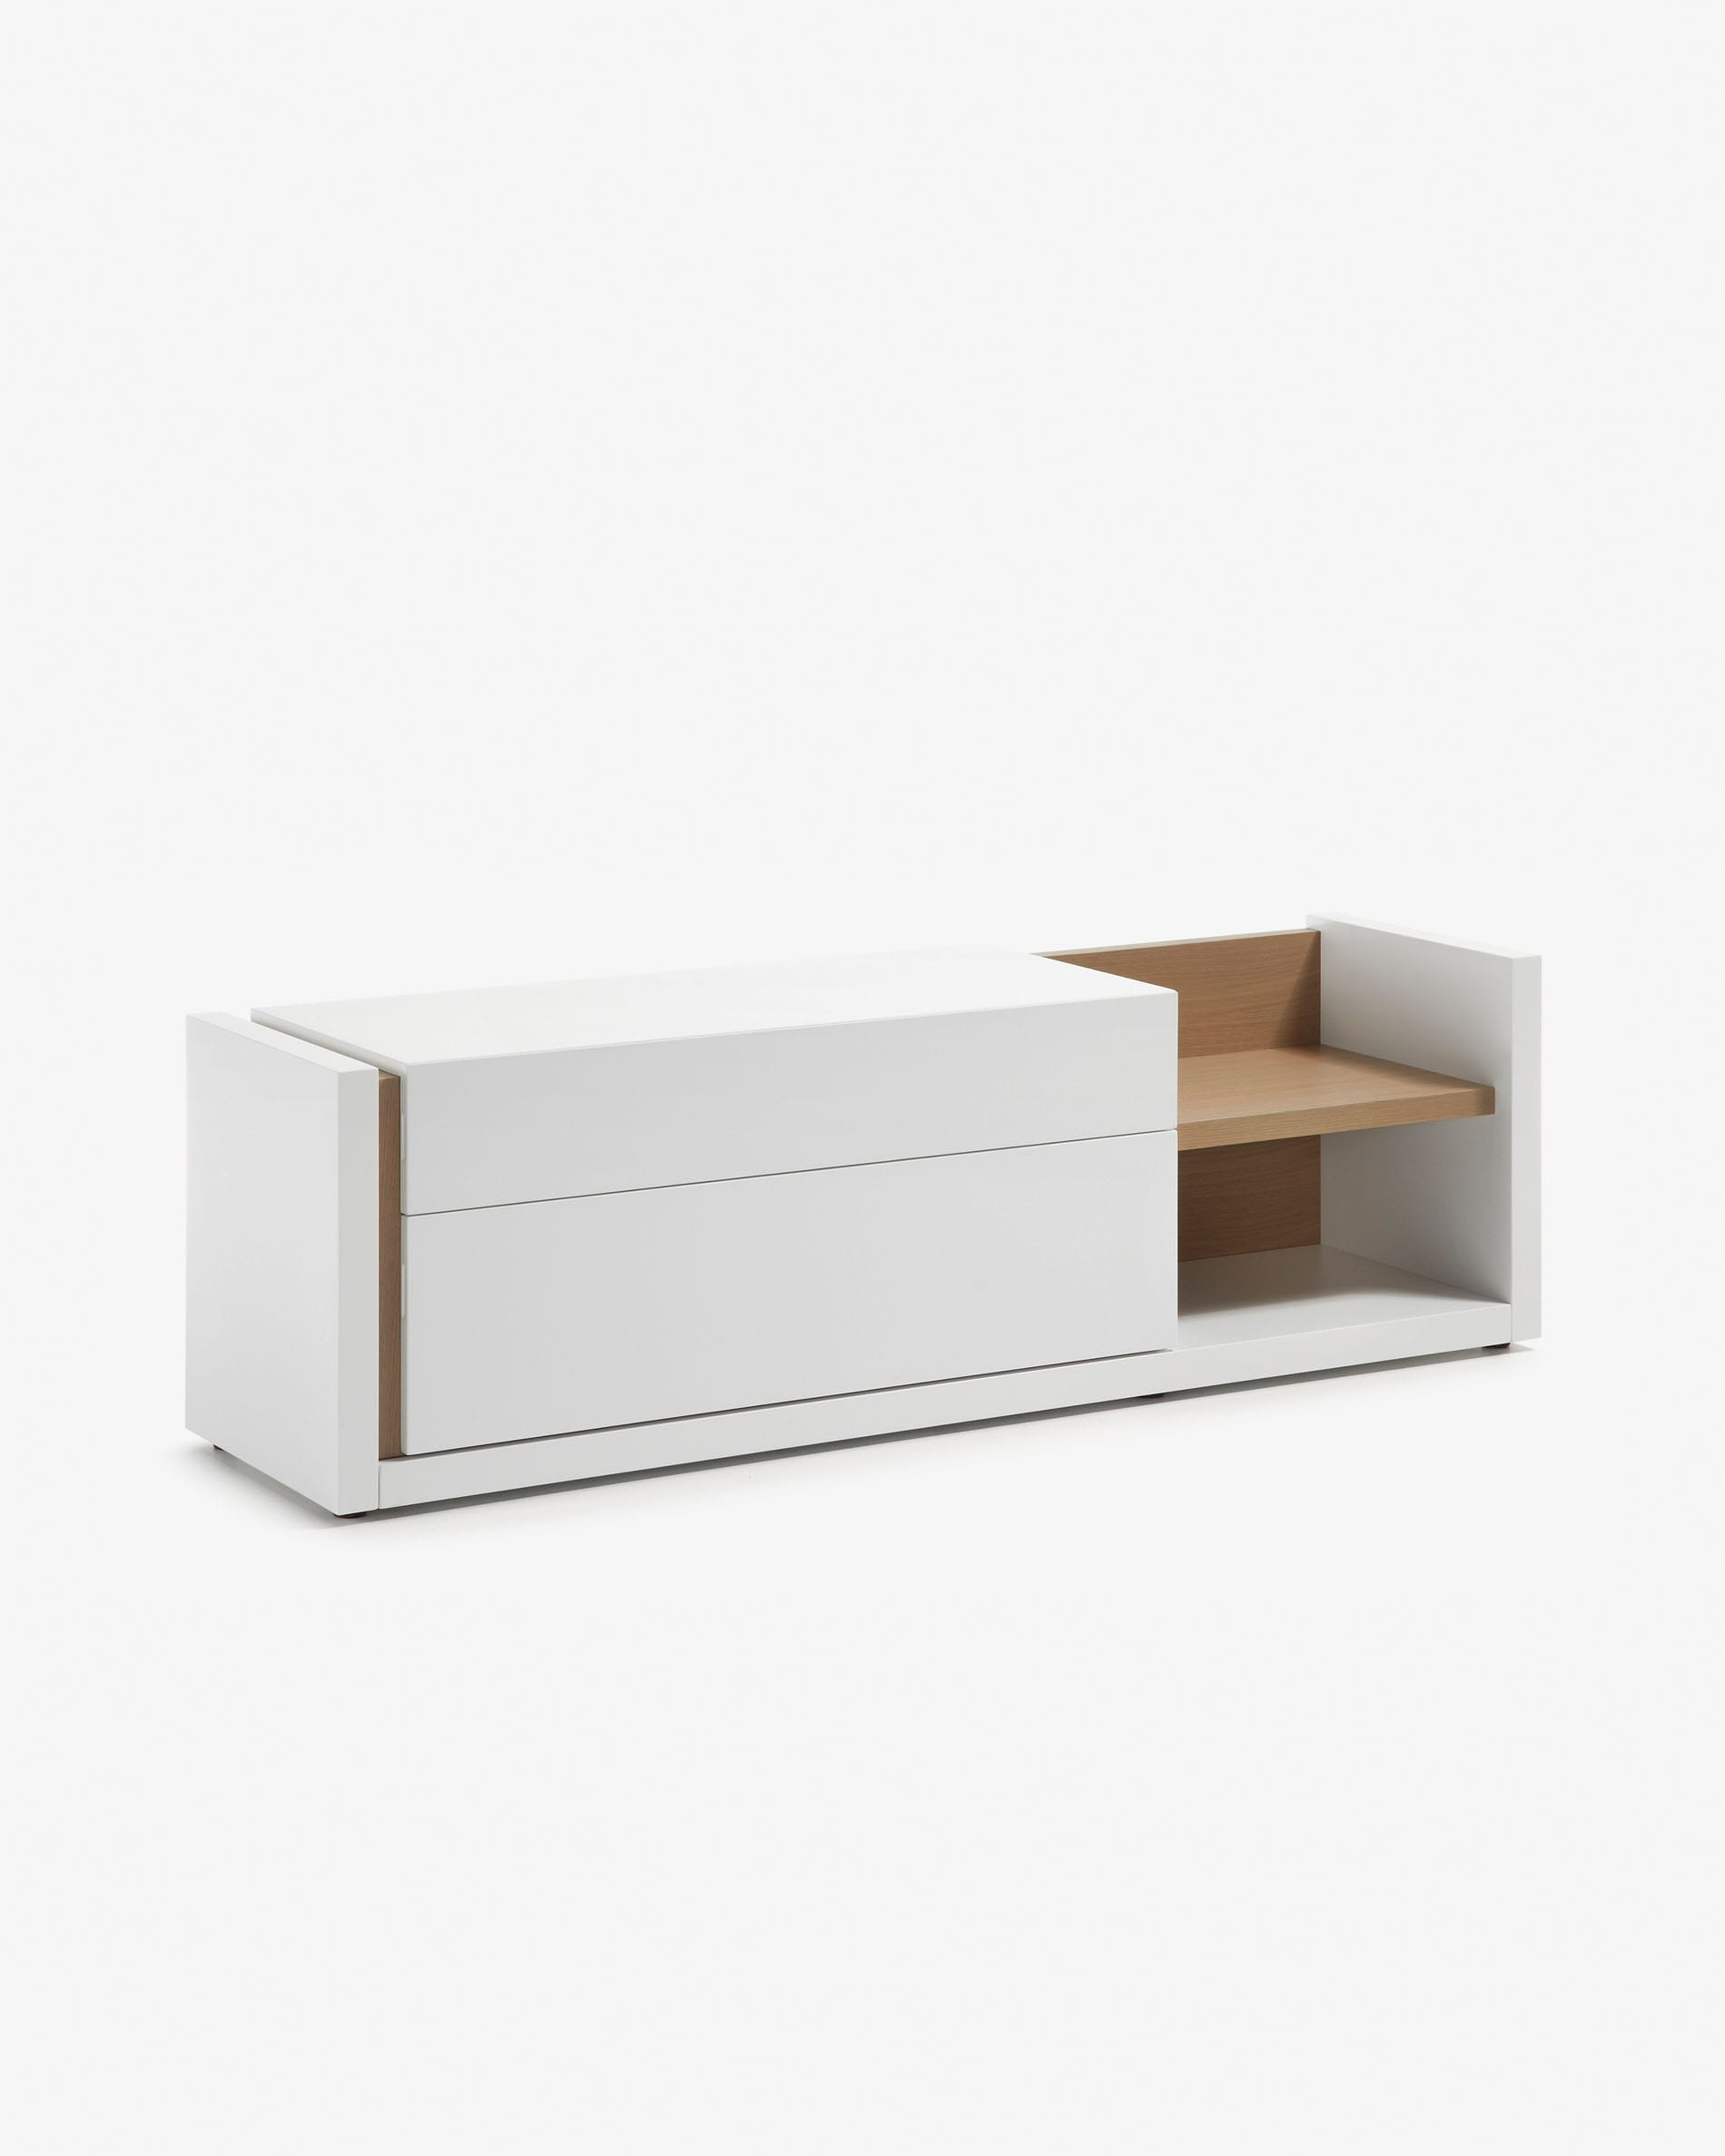 DE TV stand with white lacquer and oak veneer details 170 x 52 cm